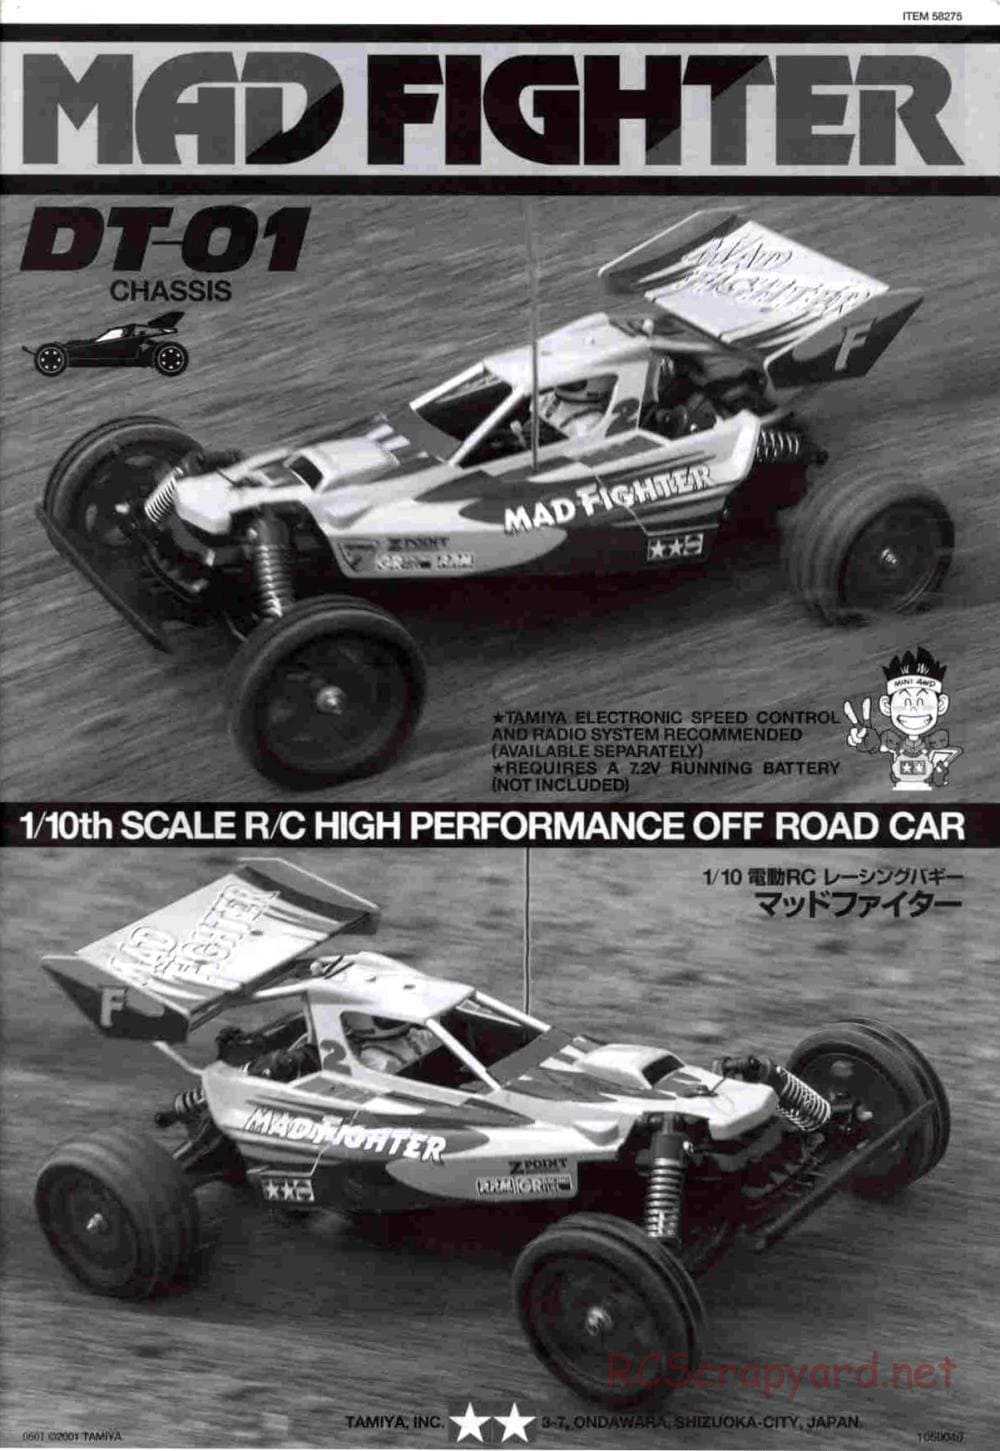 Tamiya - Mad Fighter Chassis - Manual - Page 1